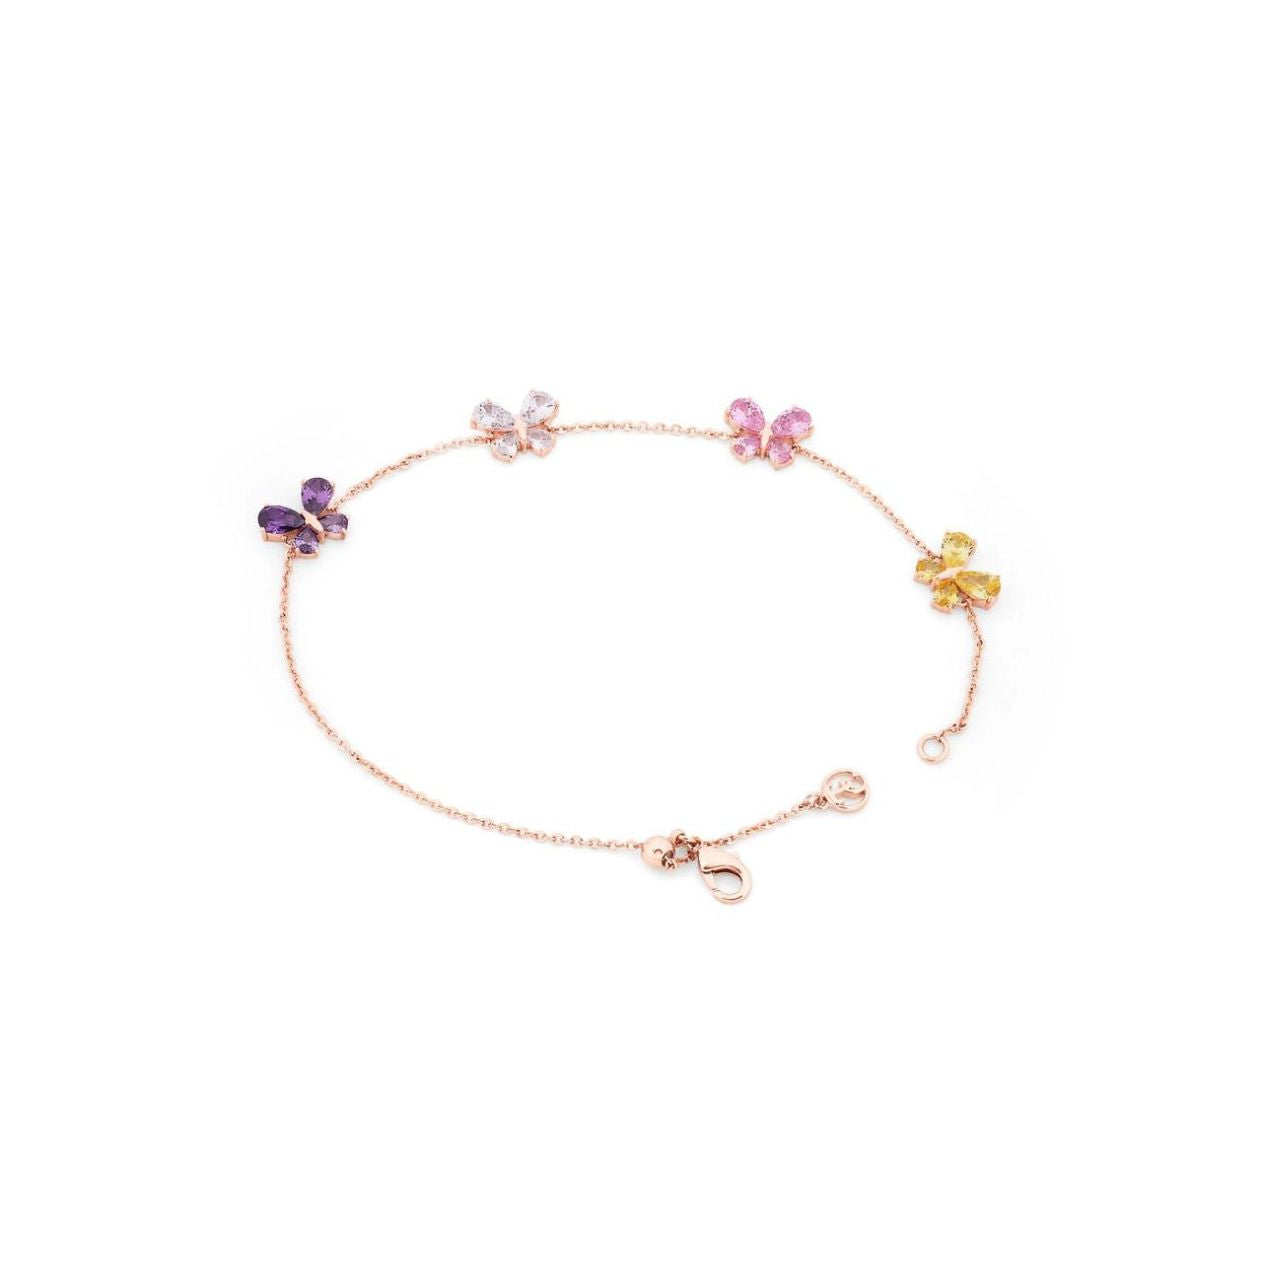 Tipperary Crystal Butterflies Rose Gold Bracelet  Drawing inspiration from urban garden, the Tipperary Crystal Butterfly collection transforms an icon into something modern and unexpected.